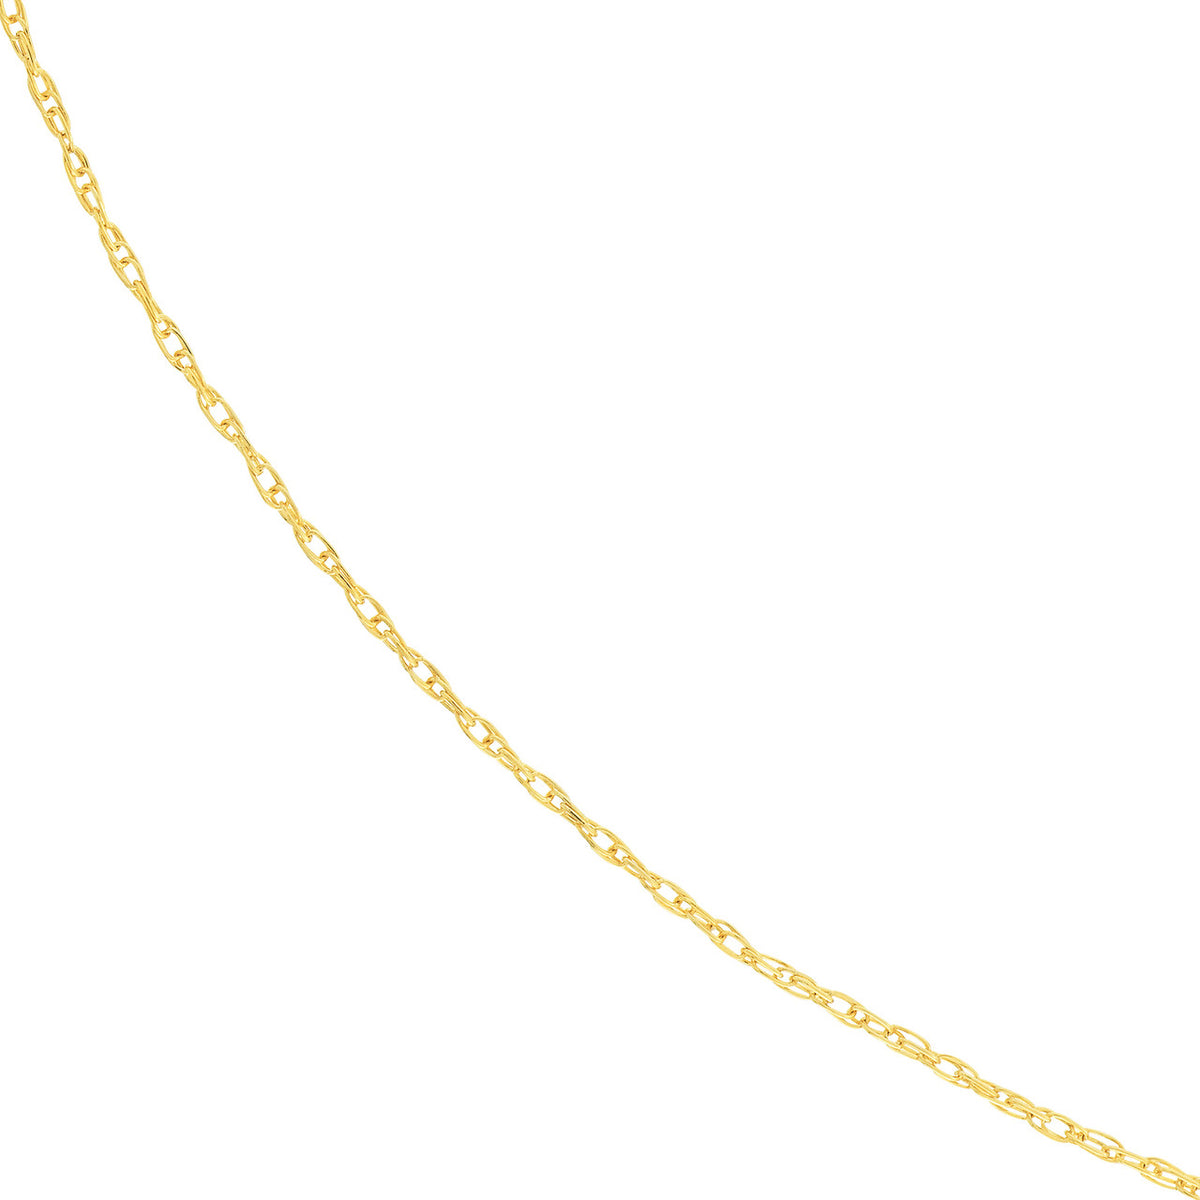 14K Yellow Gold and White Gold 0.65mm Pendant Rope Chain Necklaces with Spring Ring